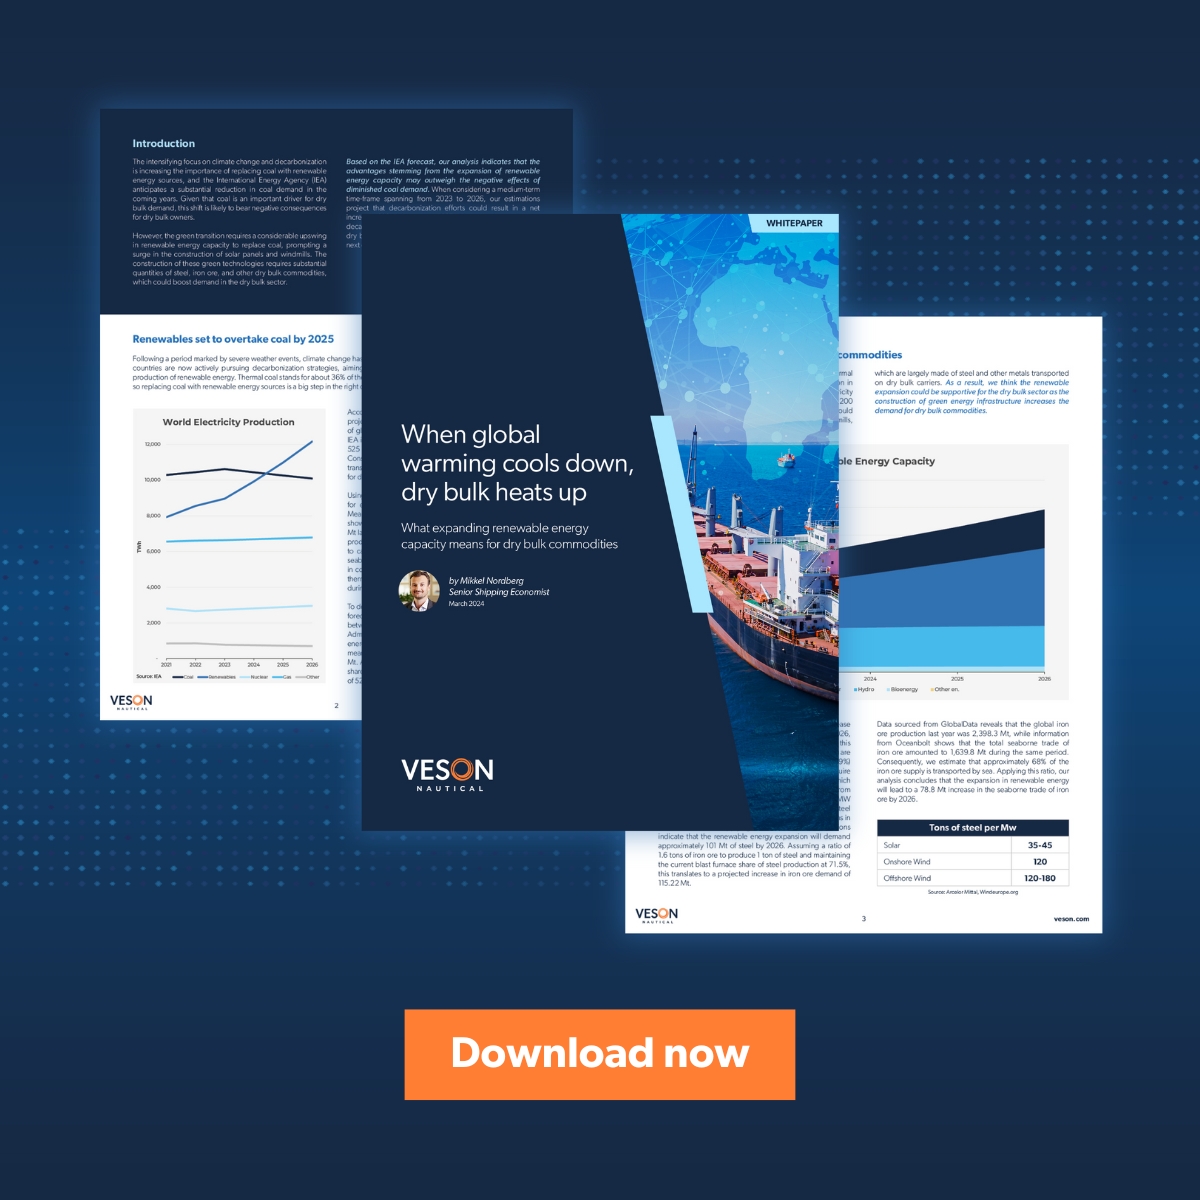 Dry Bulk shipowners are set to profit from green transition as the expansion of renewable energy capacity predicted to outweigh the negative effects of diminished coal demand. Download the whitepaper: hubs.ly/Q02qDYBk0 #Decarbonization #CoalDemand #IronOre #IronOreDemand